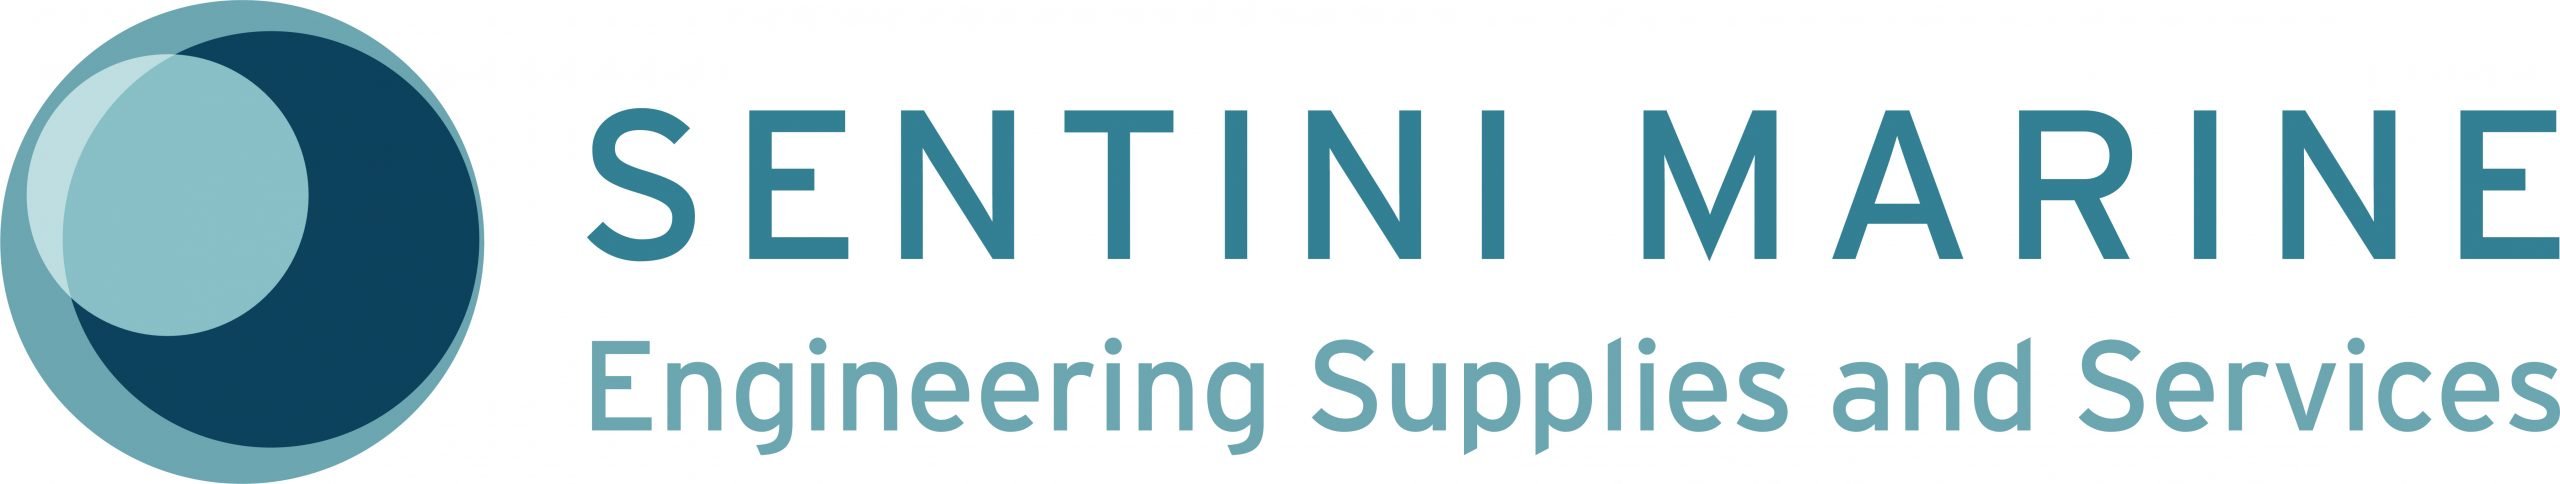 sentini marine engineer supplies and services